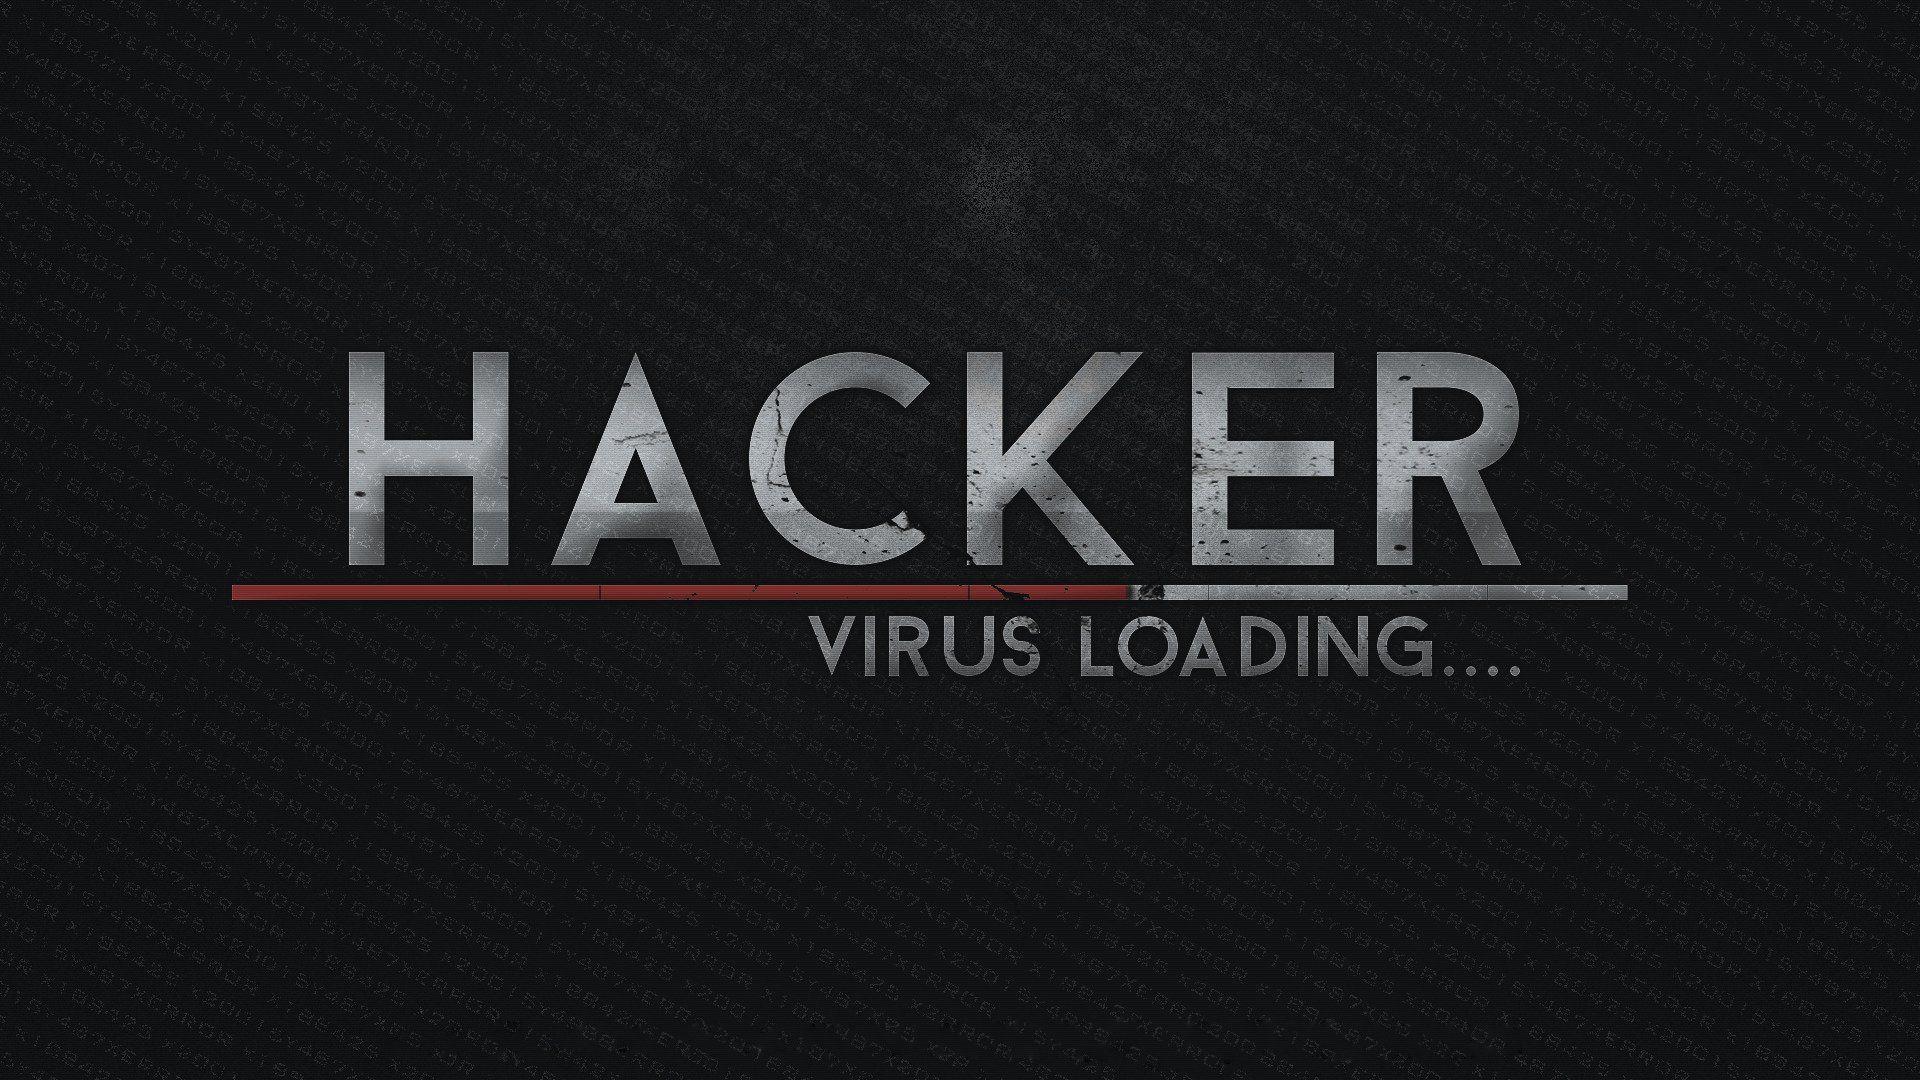 Hacker HD Wallpaper and Background Image